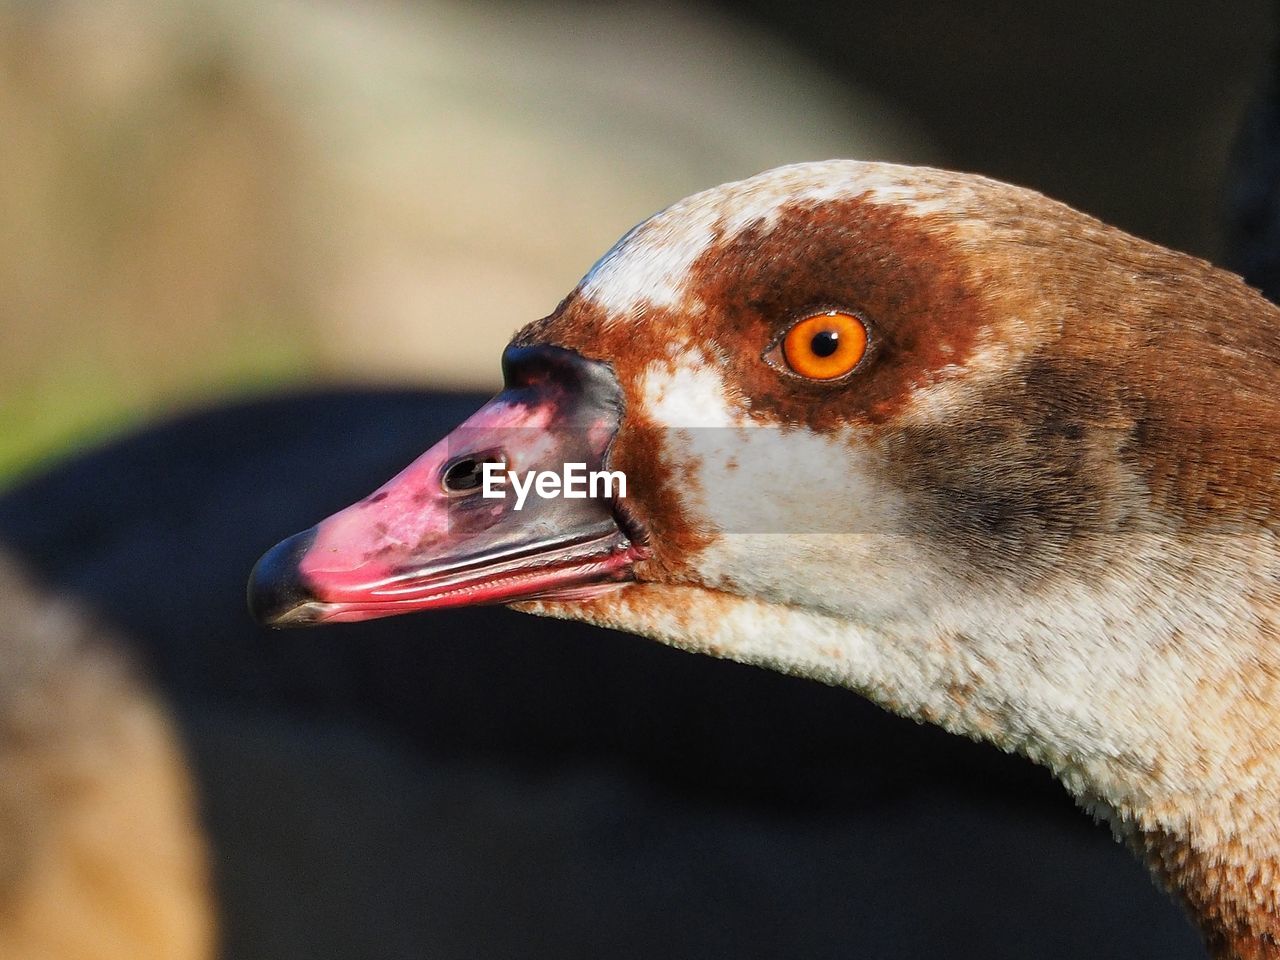 close-up of duck